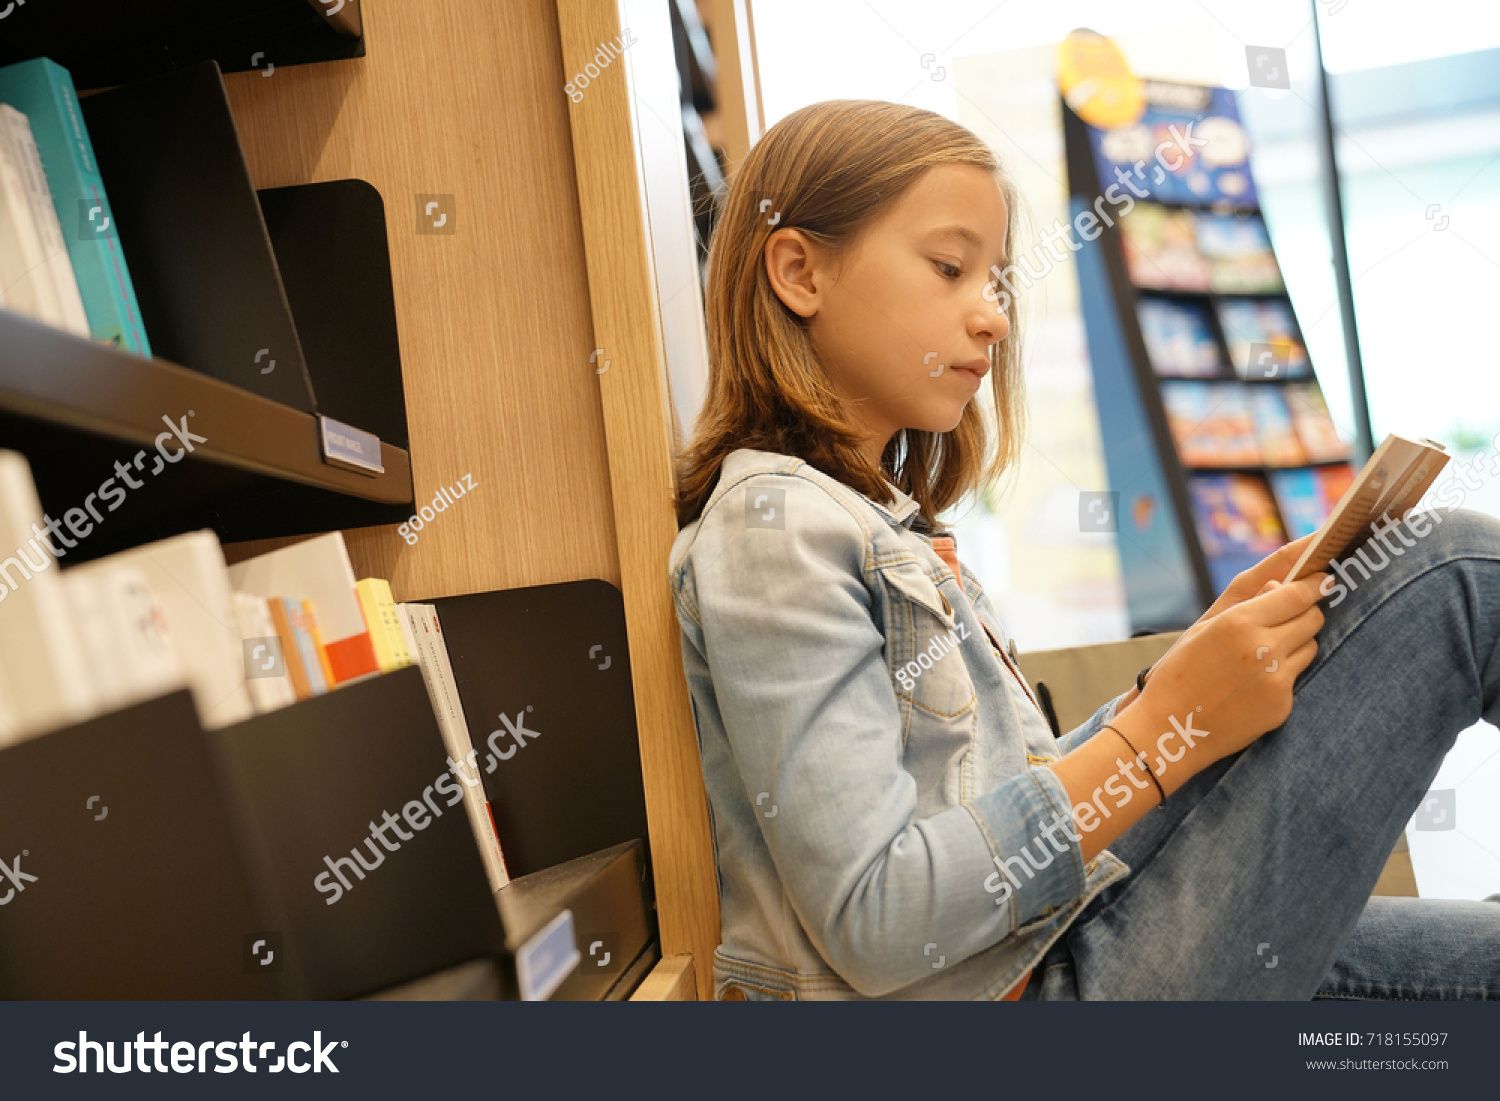 Young girl in book store reading comics #718155097